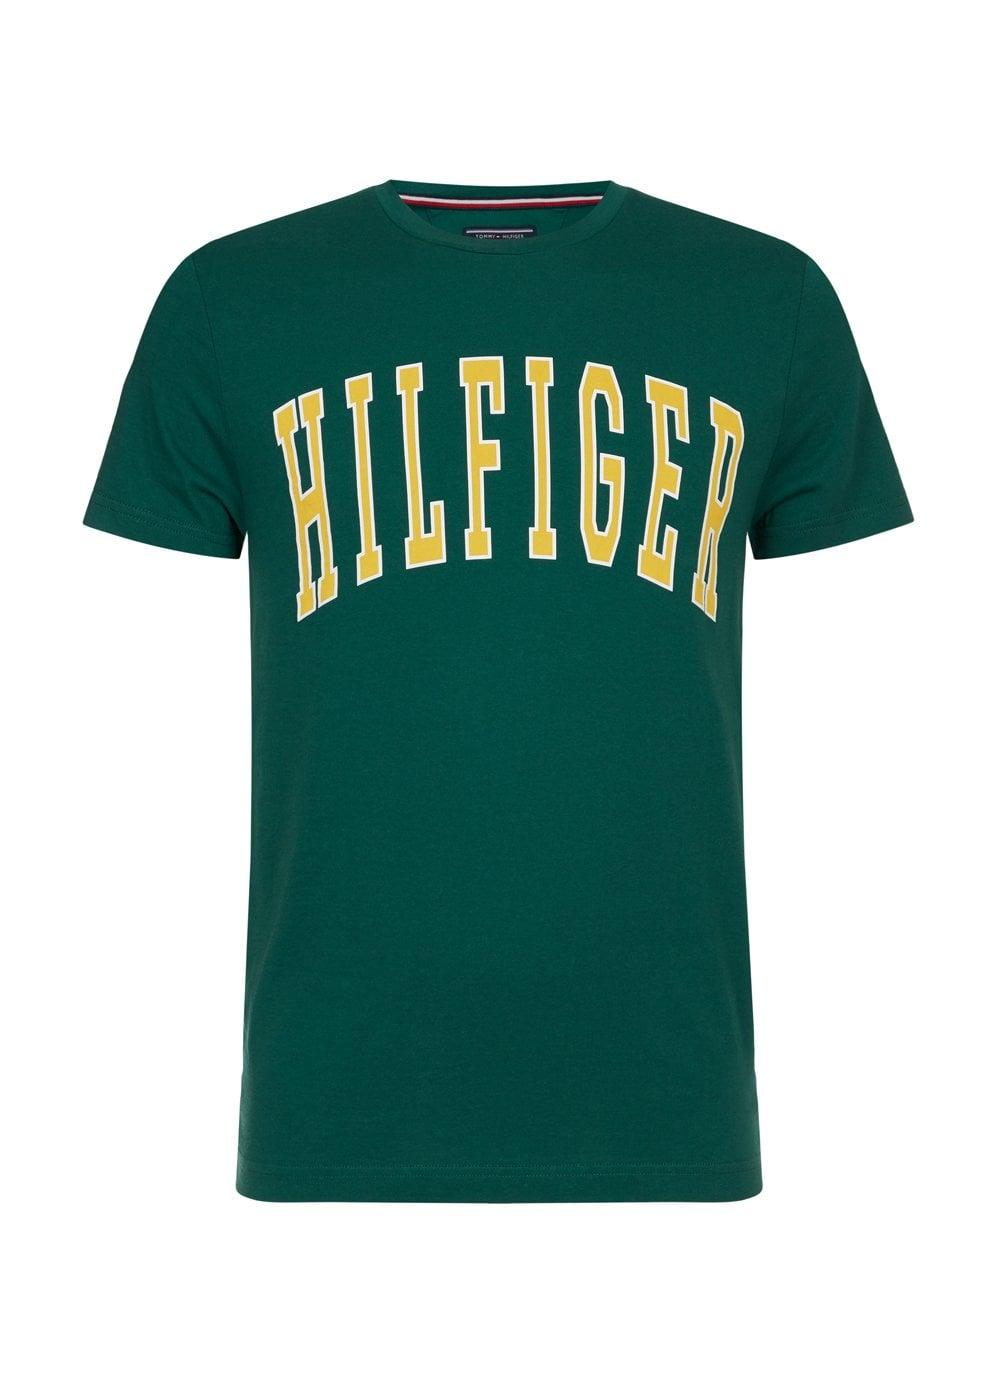 Green Clothing Logo - Tommy Hilfiger Mens College Logo Tee Green - Clothing from Time ...